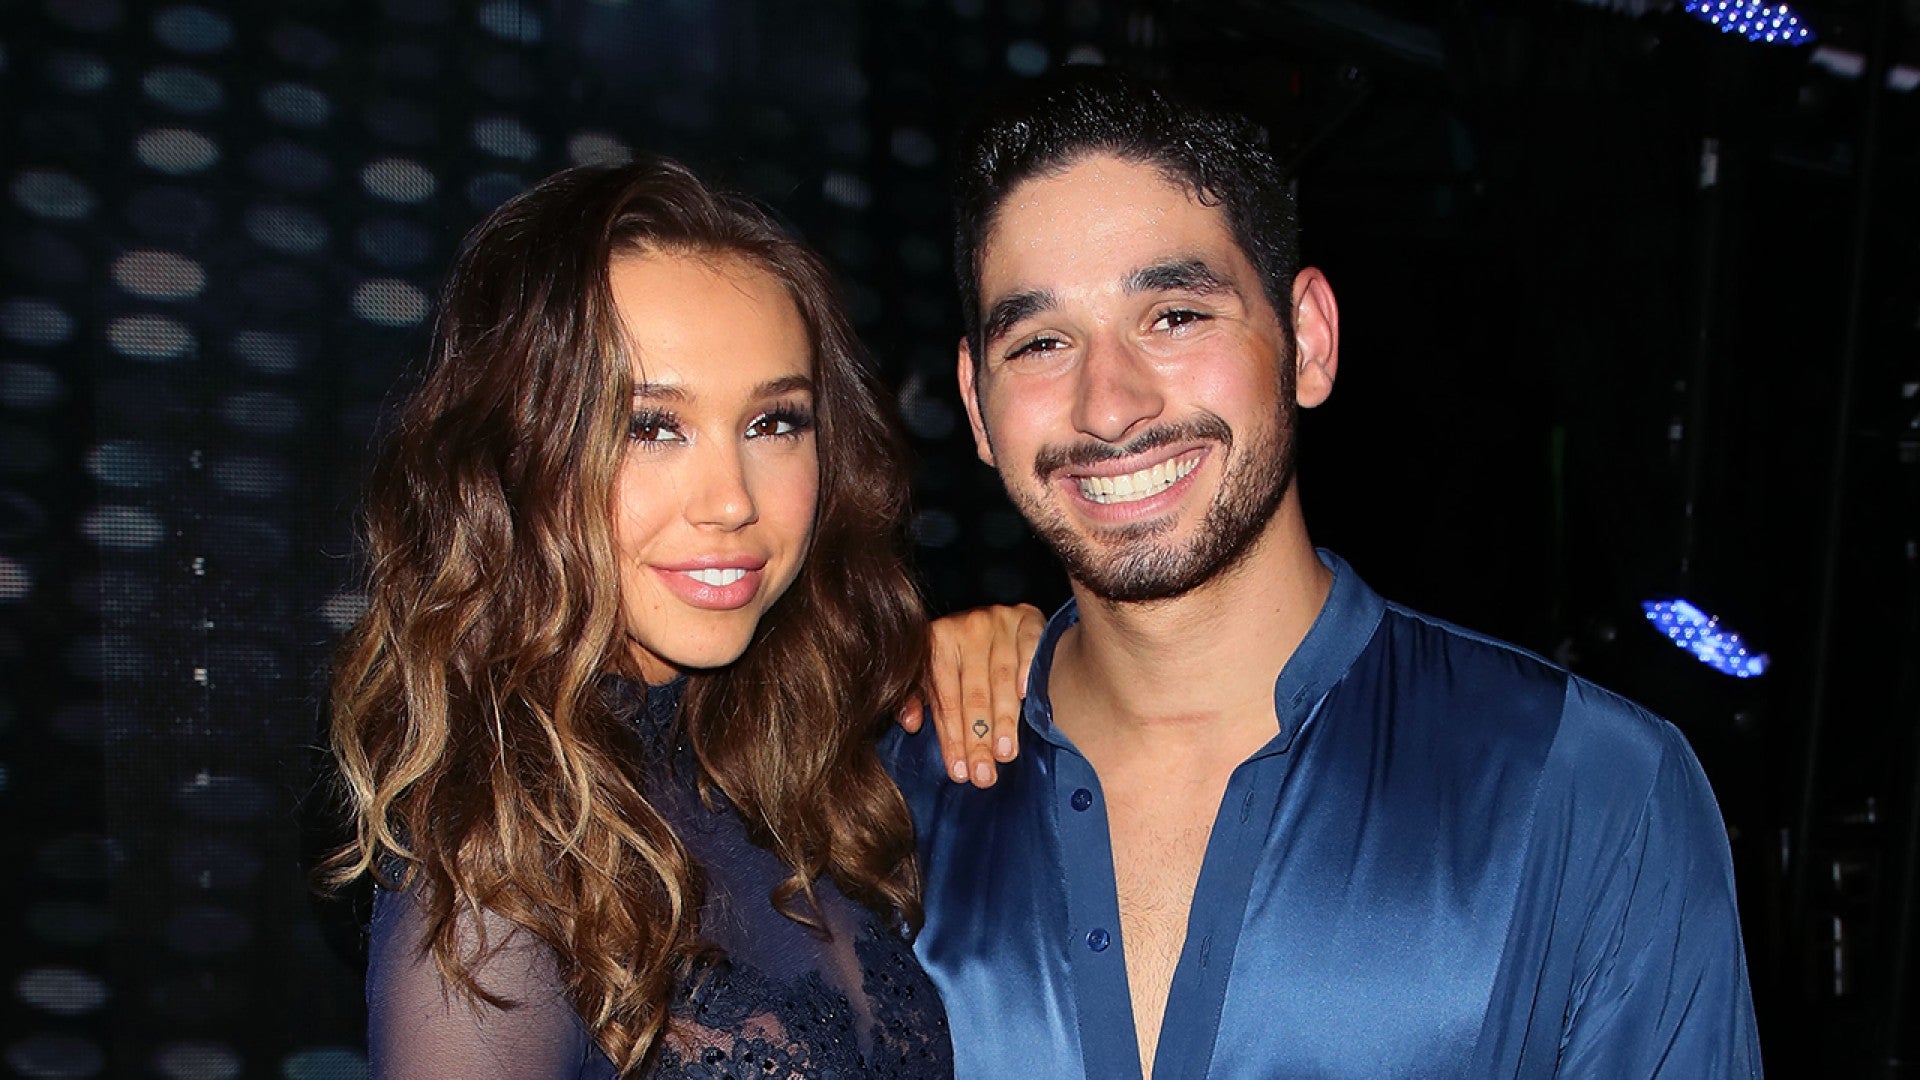 What couple broke up on dwts?